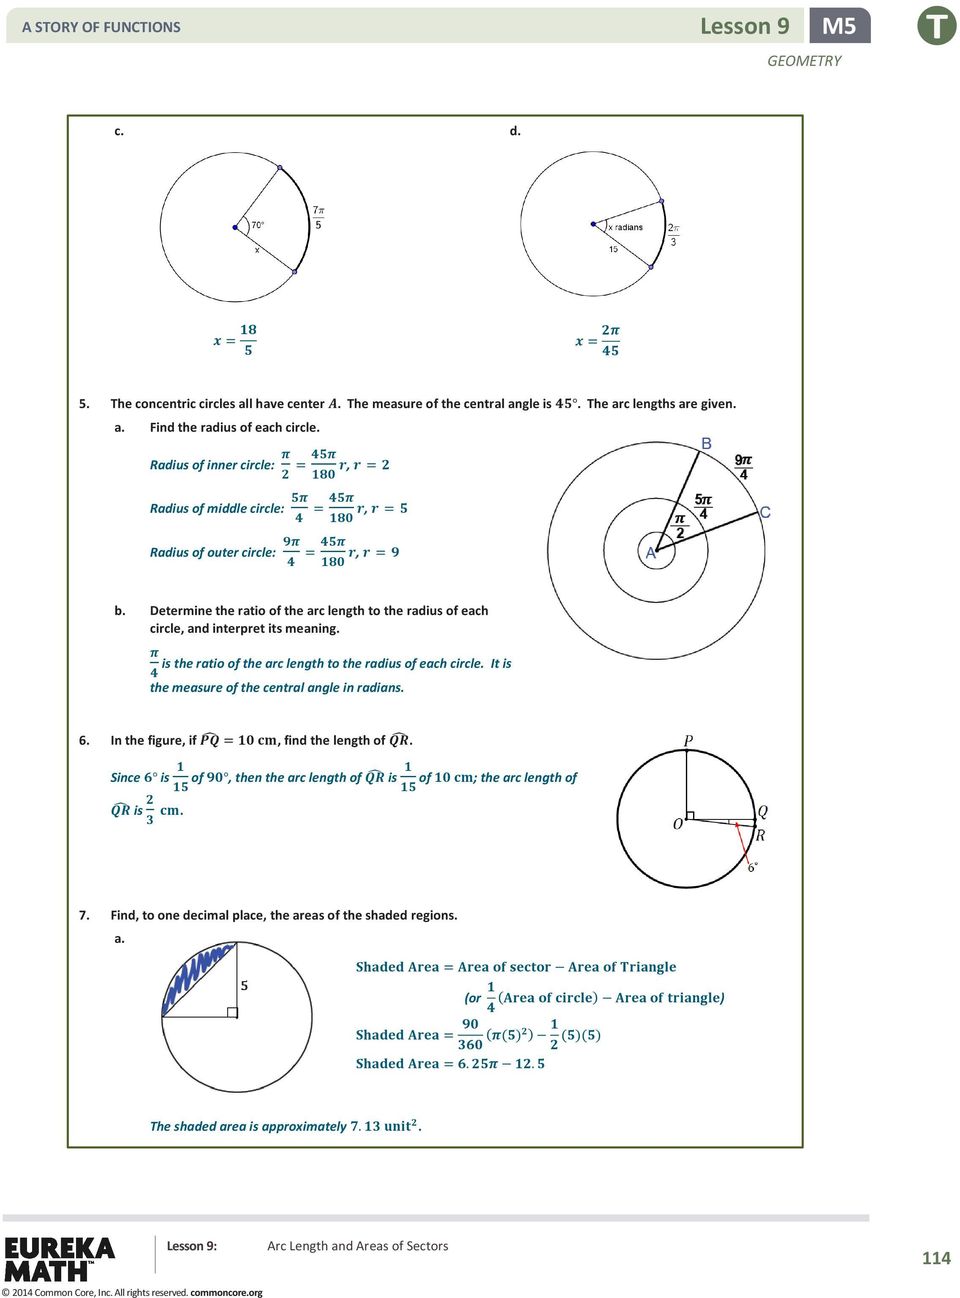 Determine the ratio of the arc length to the radius of each circle, and interpret its meaning. is the ratio of the arc length to the radius of each circle.